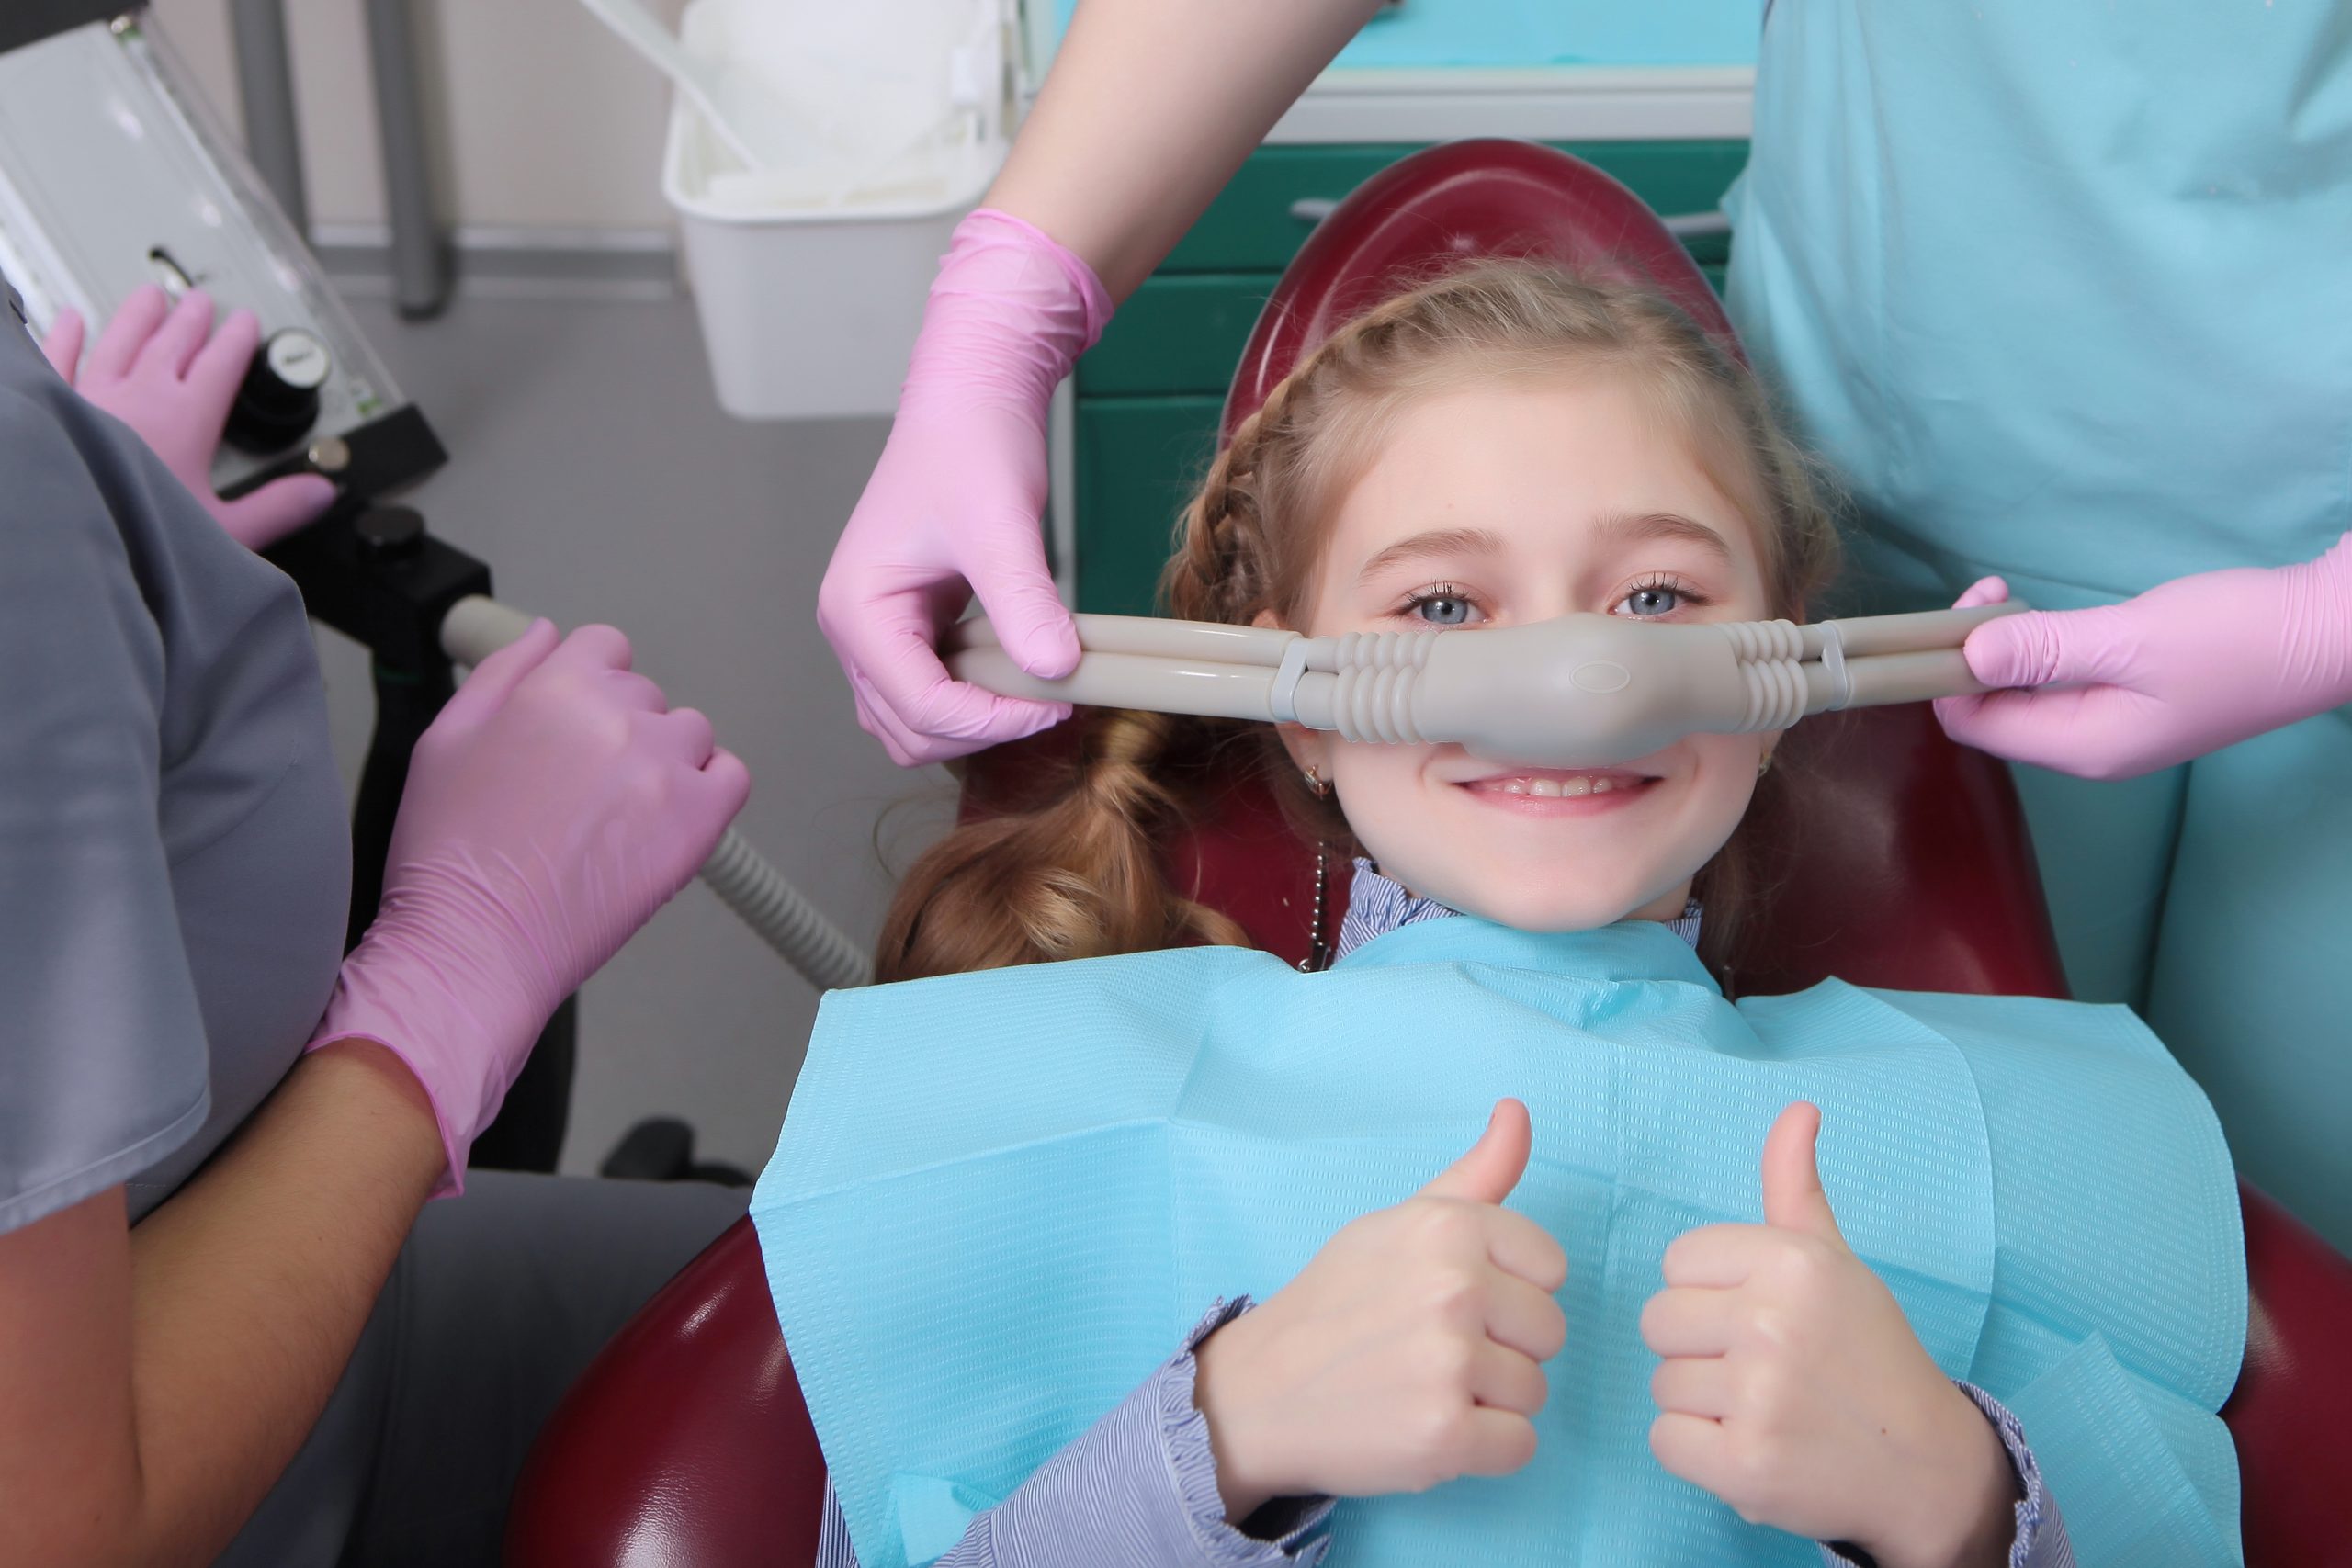 A little girl is comfortable to treat her teeth under superficial sedation